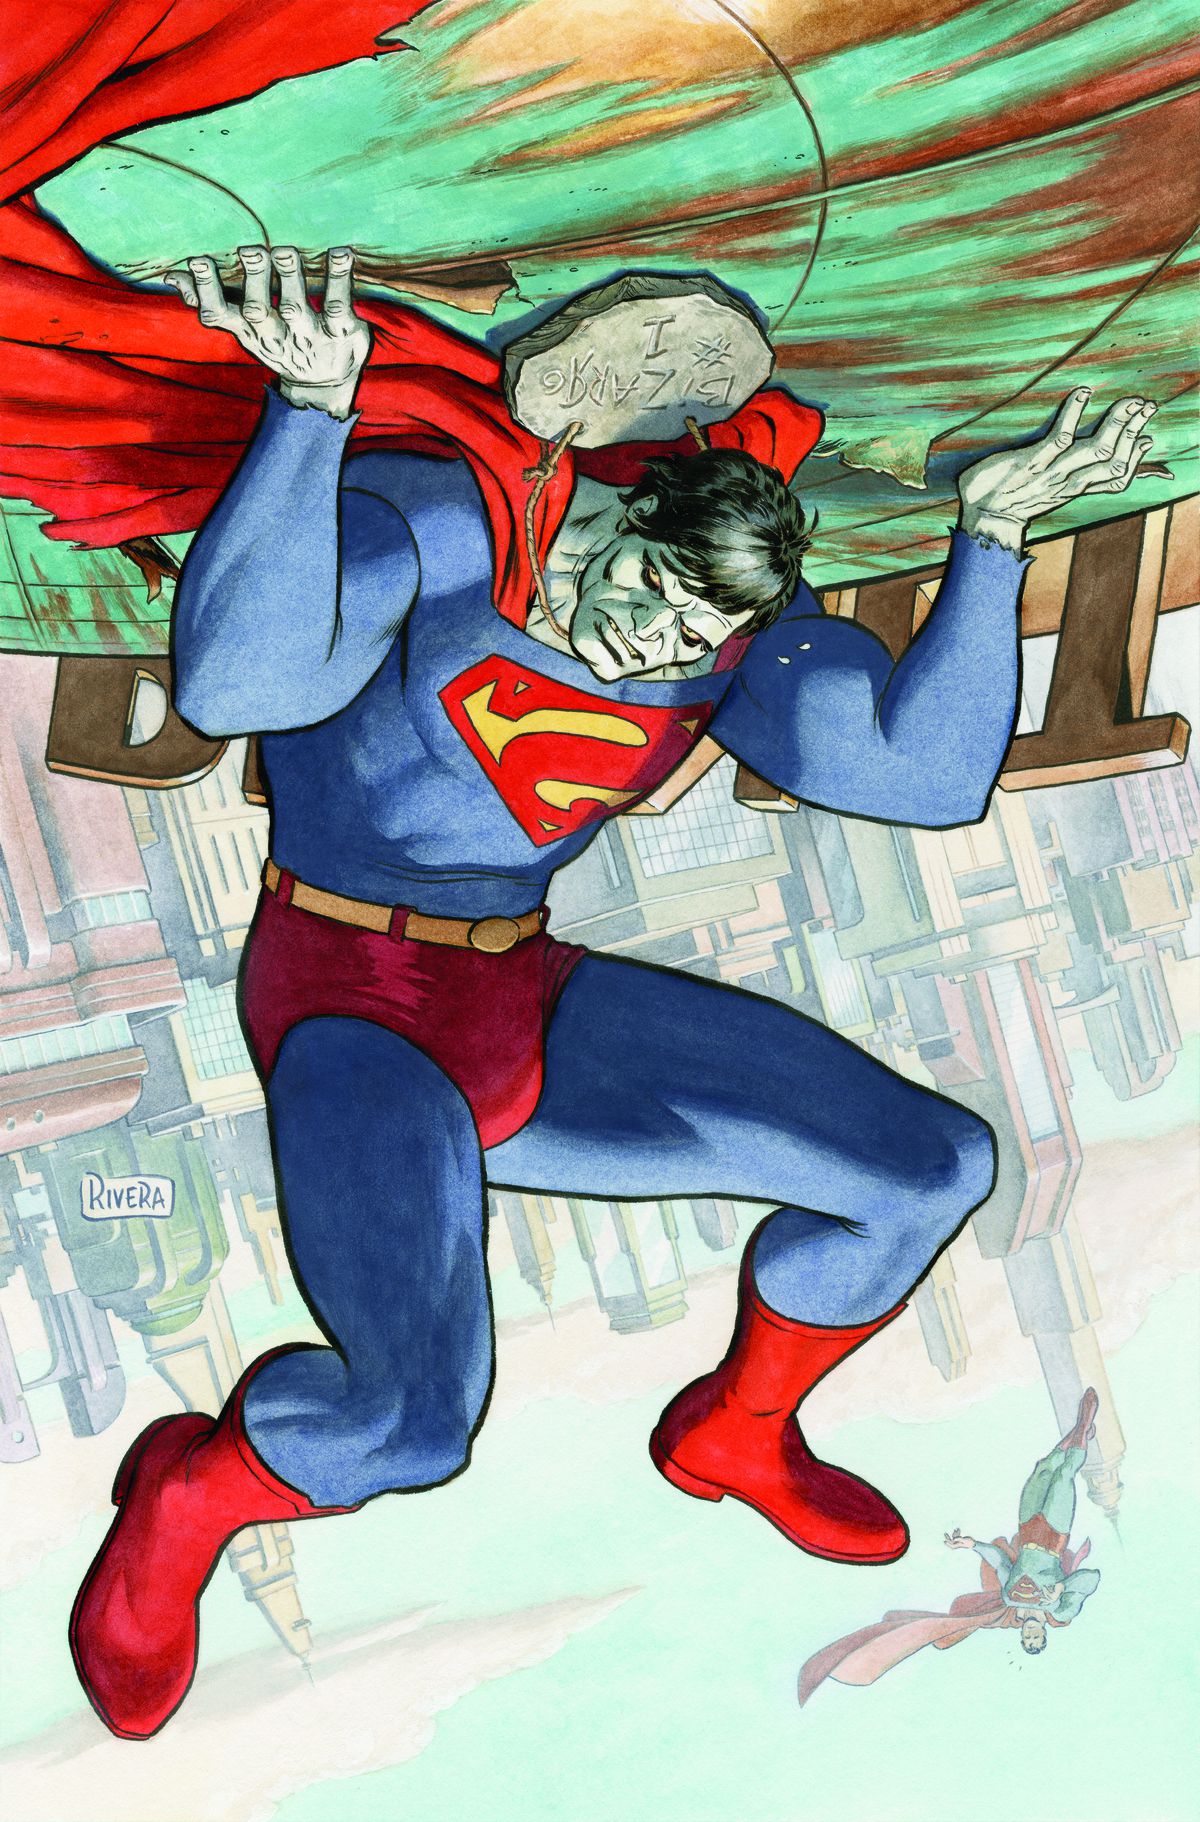 Bizarro appears to be holds the Daily Planet globe on his shoulders like Atlas while hovering in mid air. From the background, however, we can tell that he’s actually upside down and not holding anything “up” at all, on a cover for Action Comics #1061.